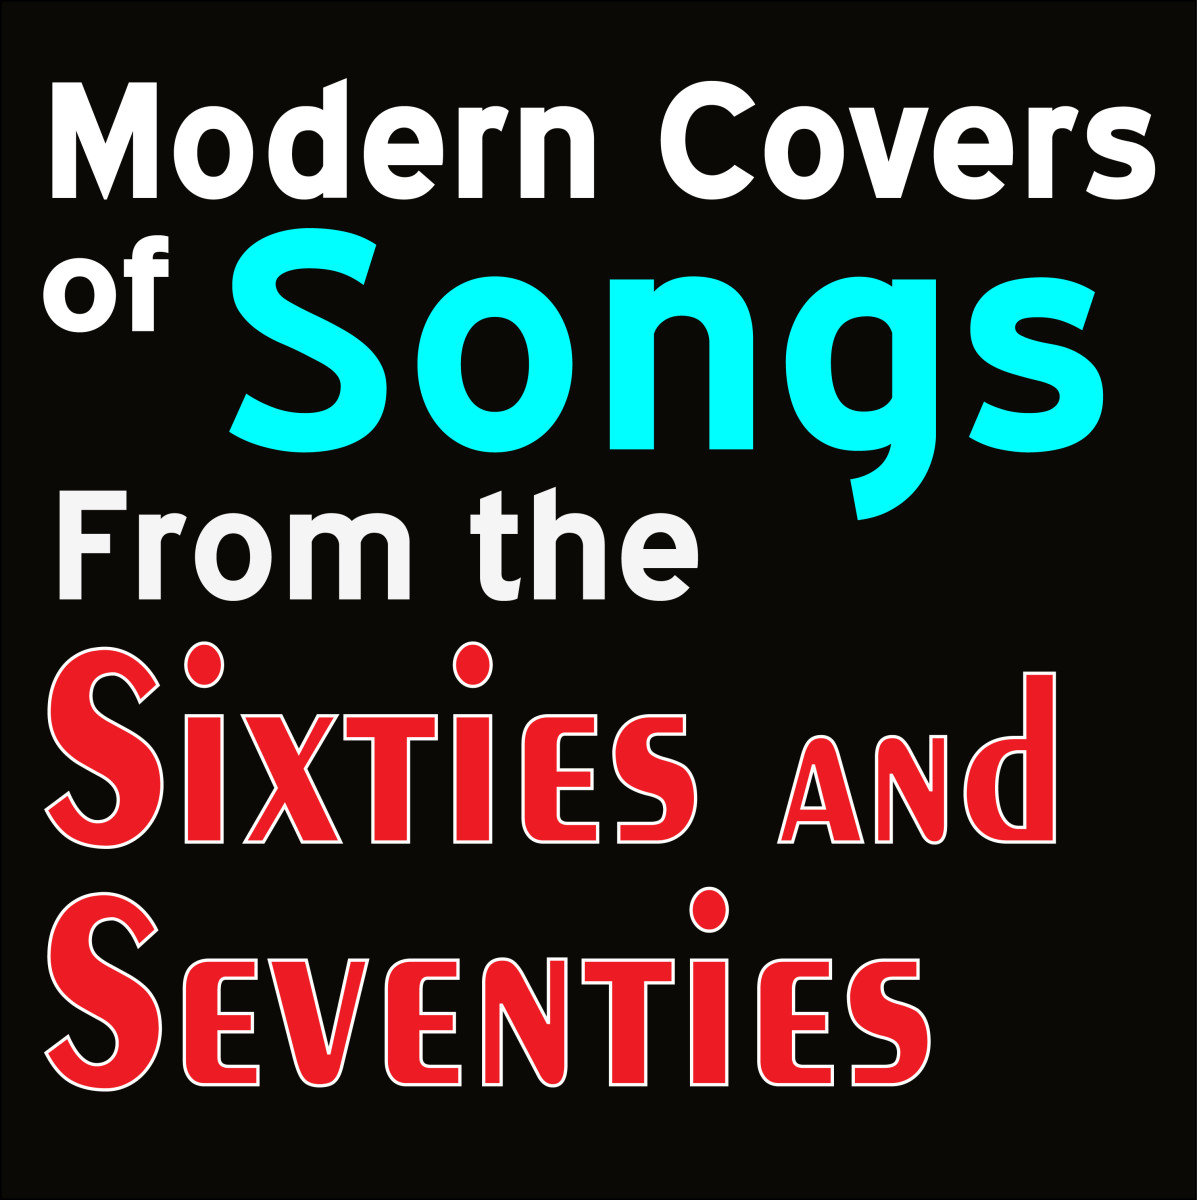 10 Modern Covers of Songs From the Sixties and Seventies